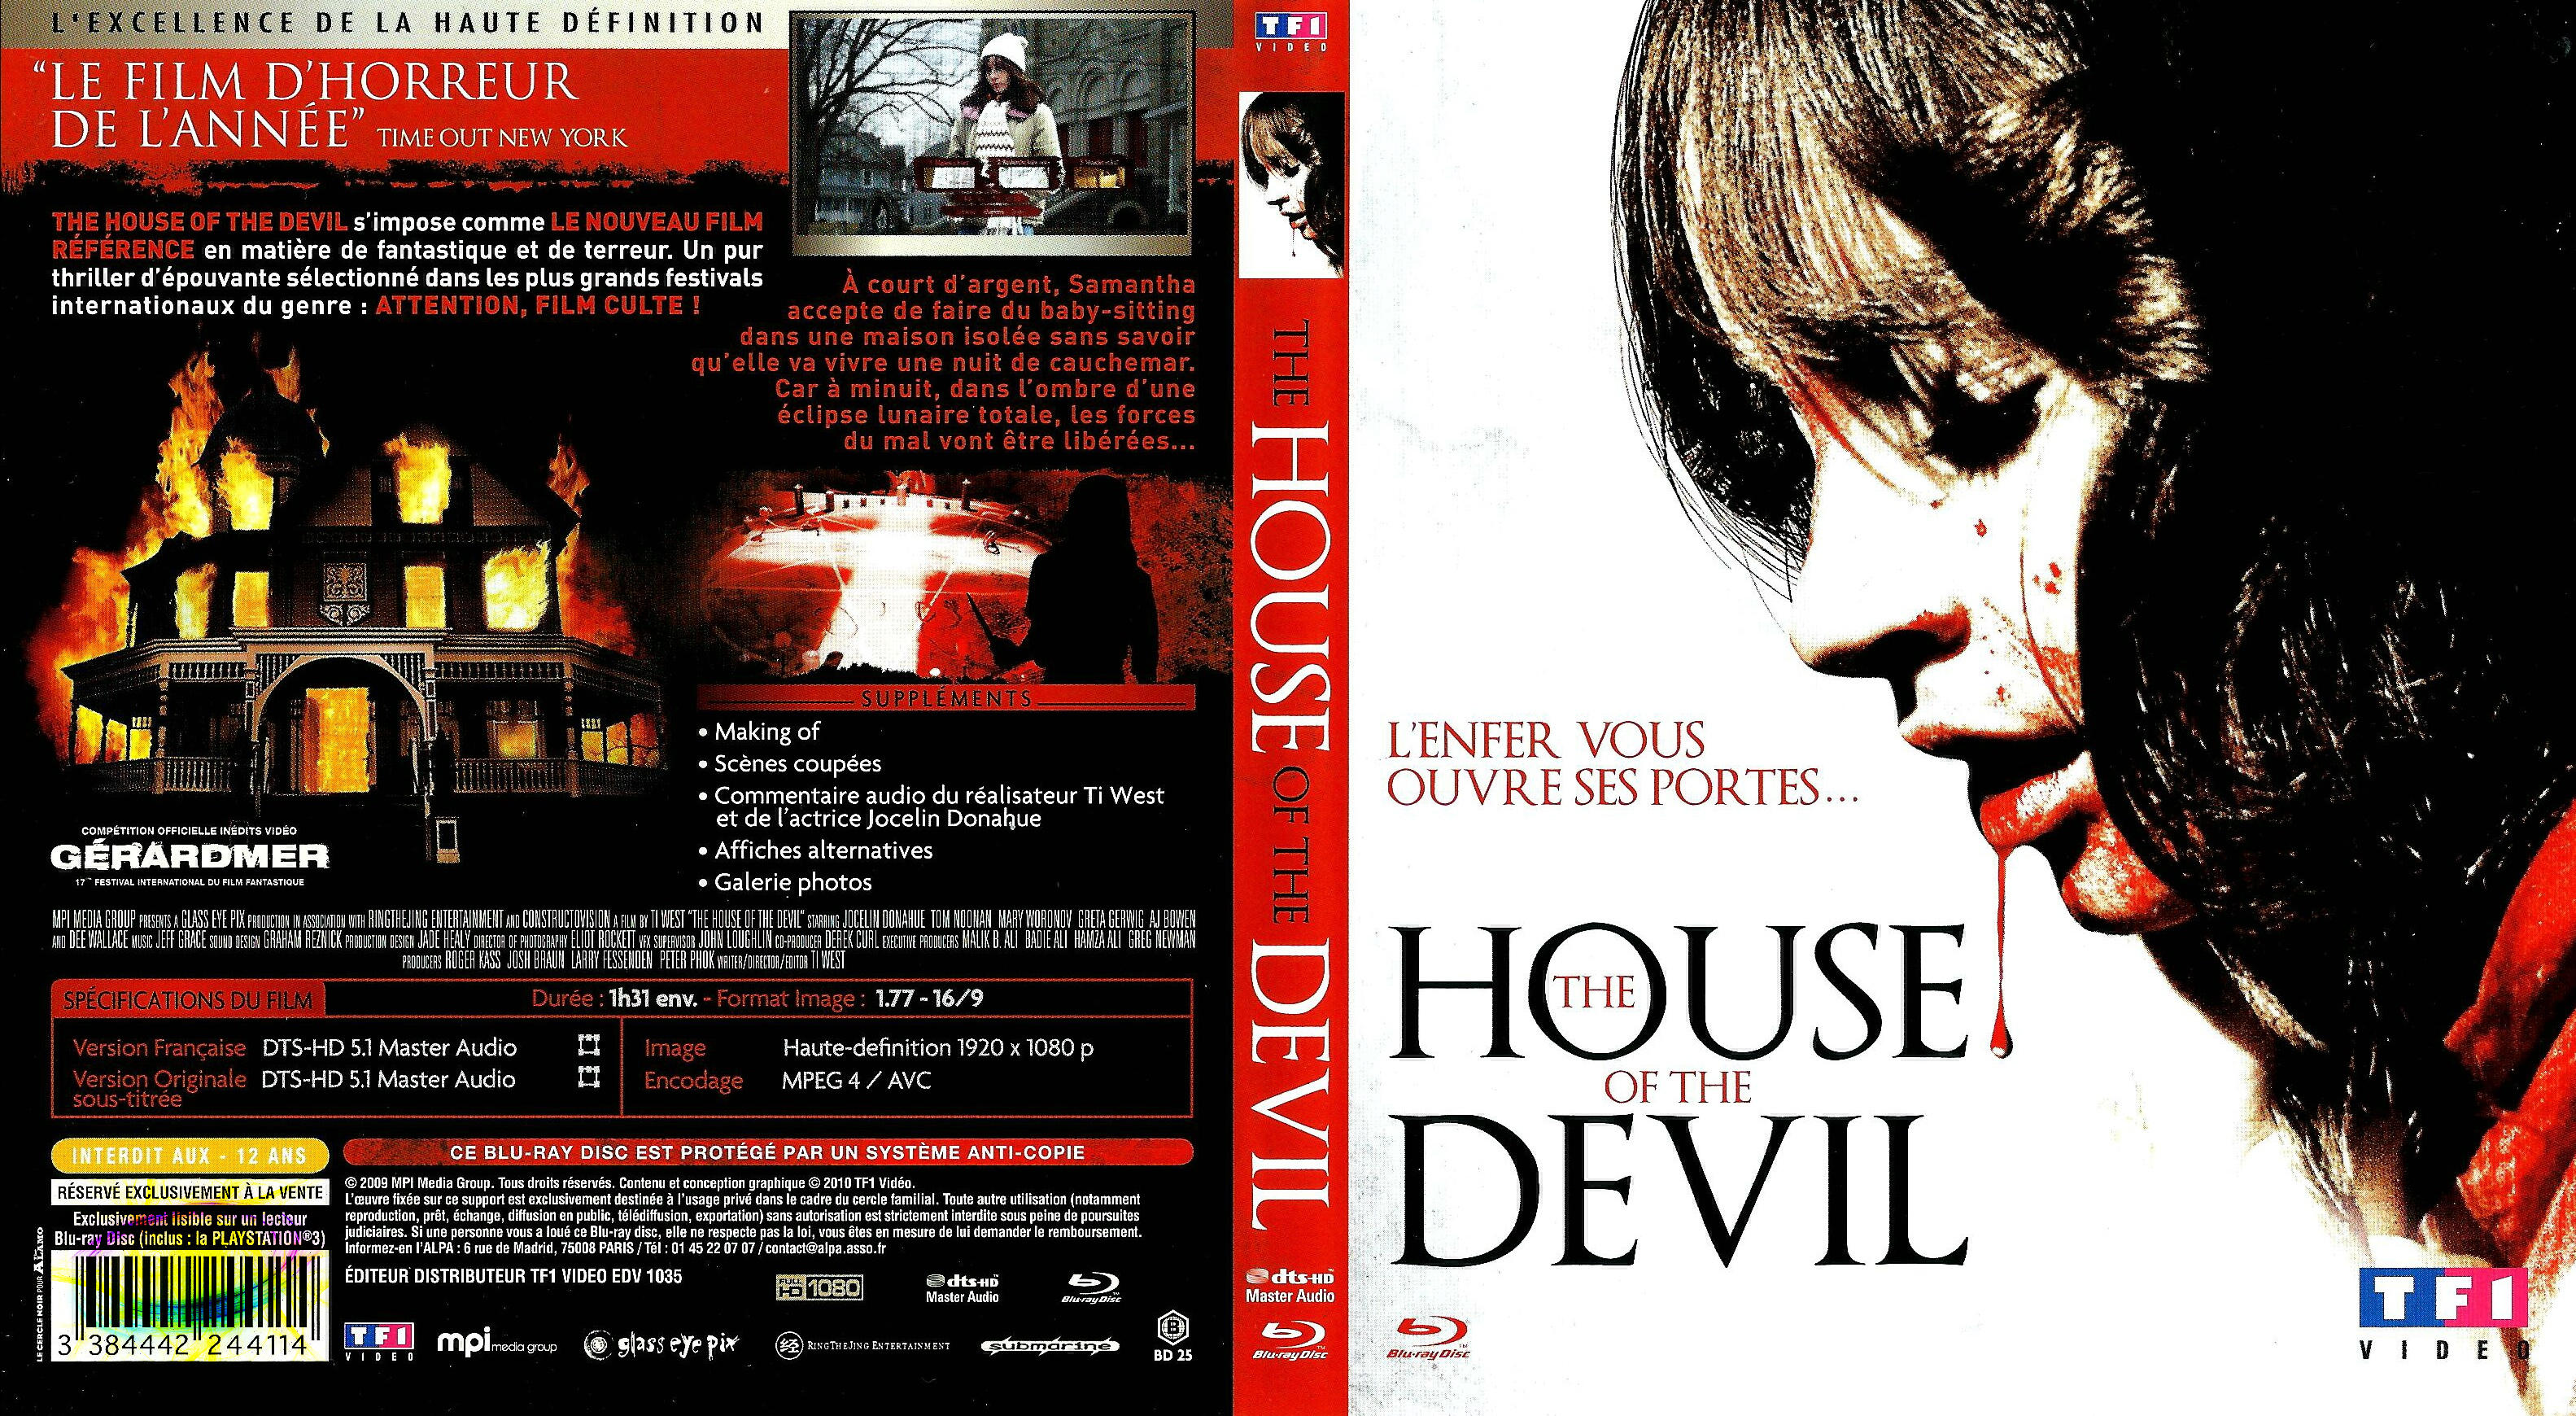 Jaquette DVD The house of the devil (BLU-RAY)